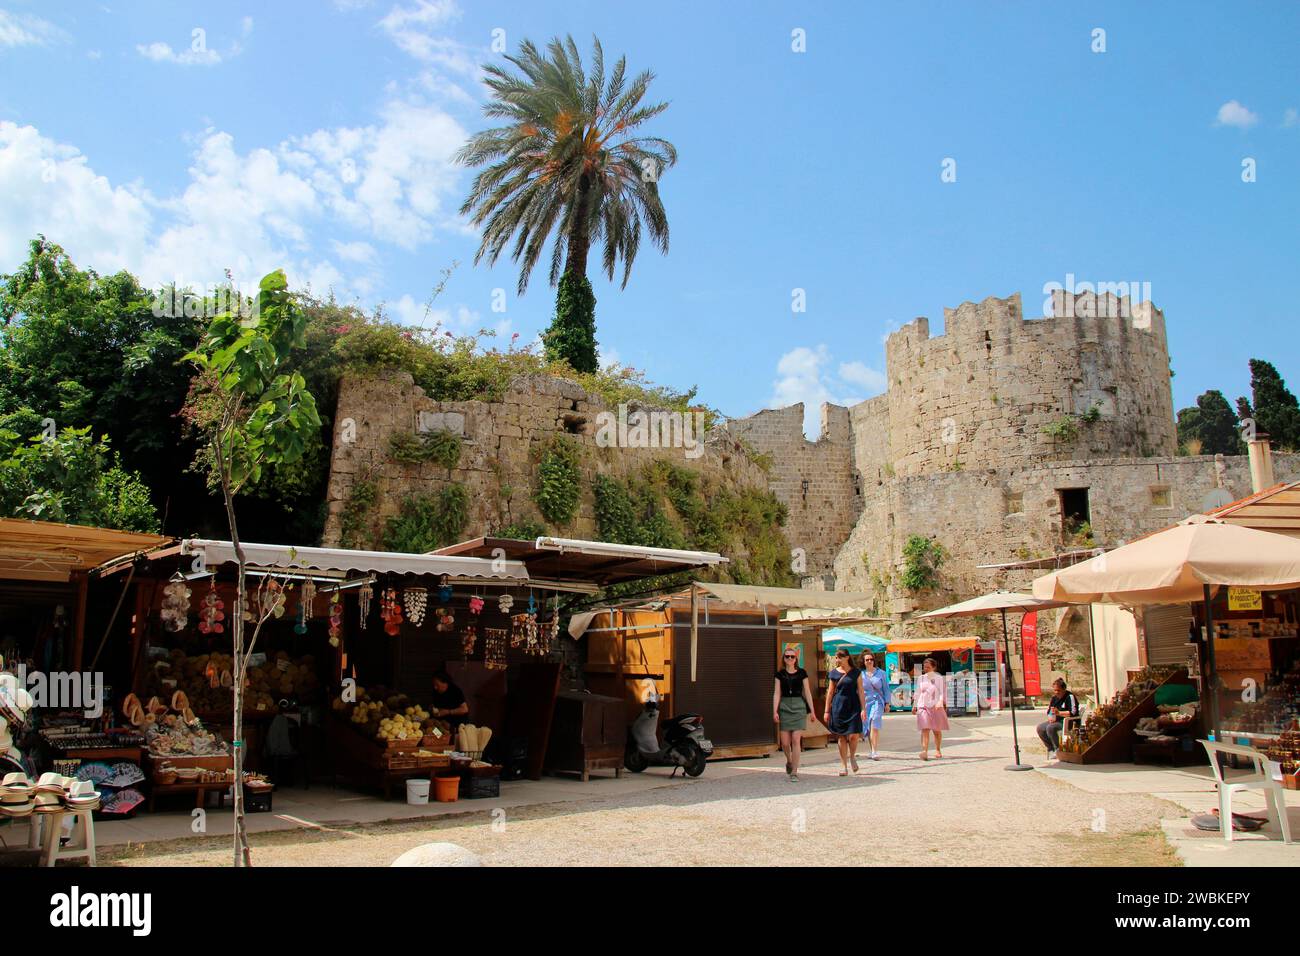 Group of young women strolling through the old town of Rhodes, Greece Stock Photo